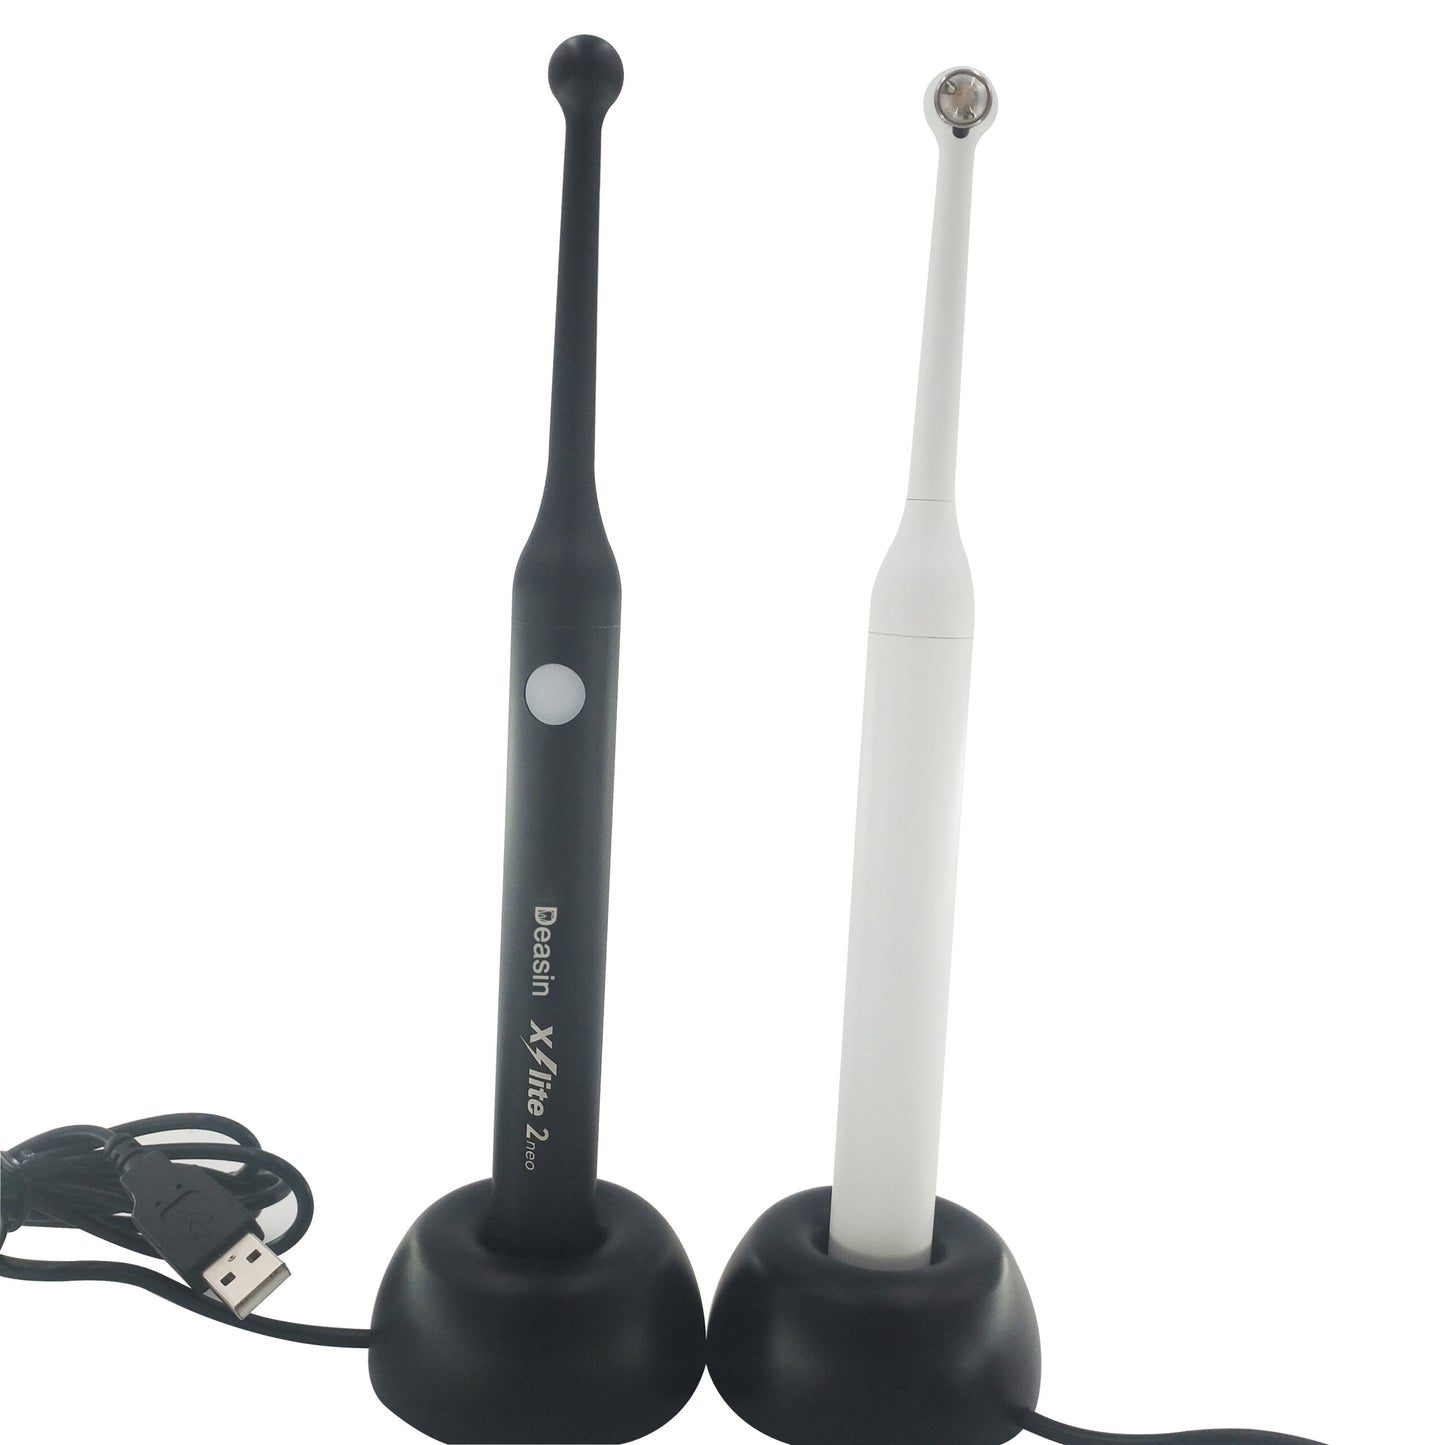 New One Second Dental LED Curing Light /1s Powerful LED Curing Lamp Suitable For Medical Dentistry Equipment